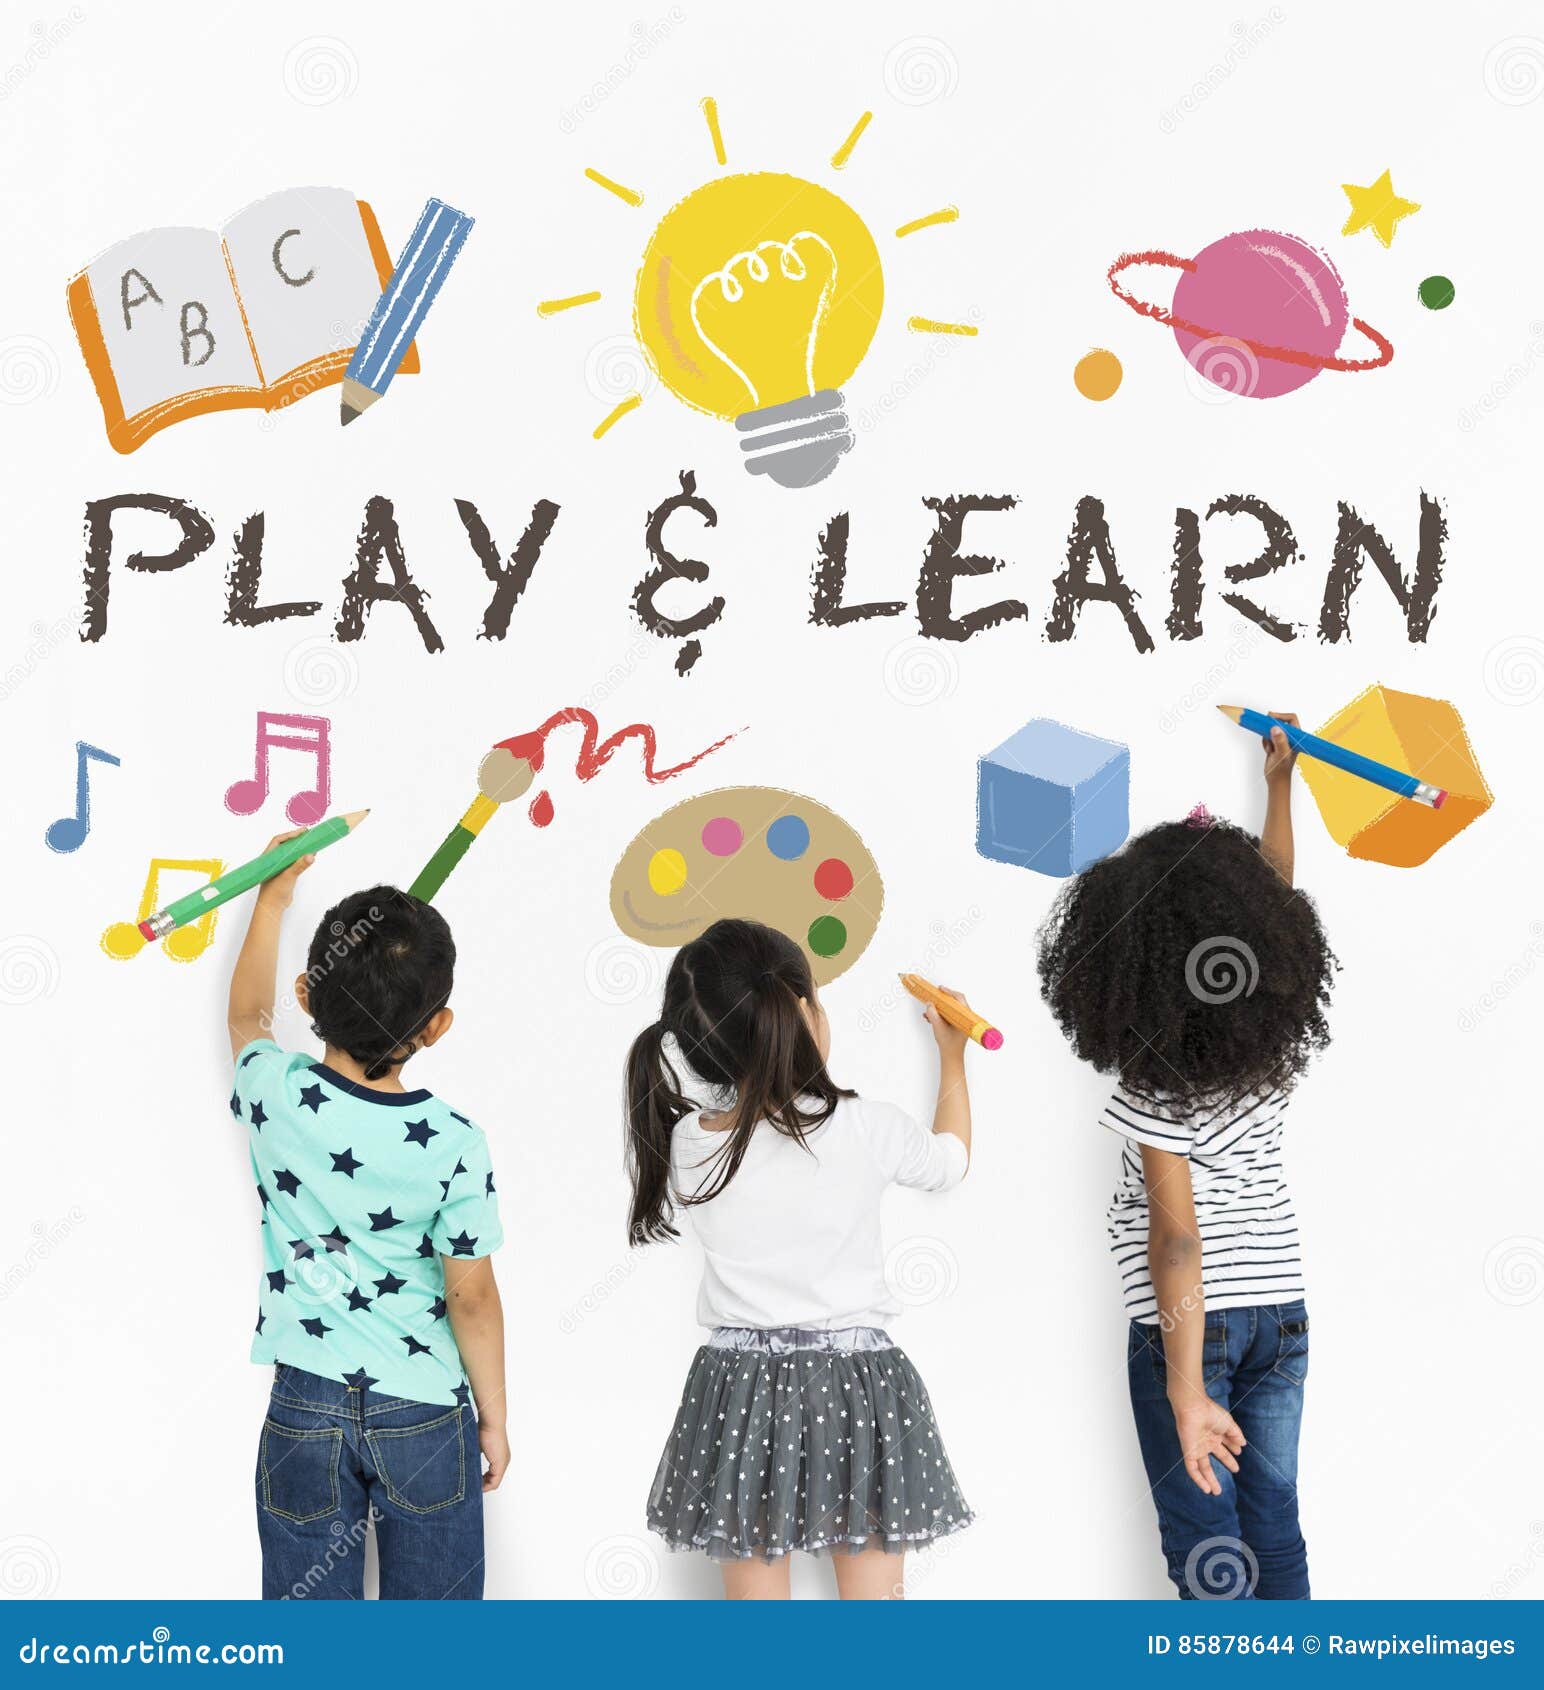 learn play education learning icon